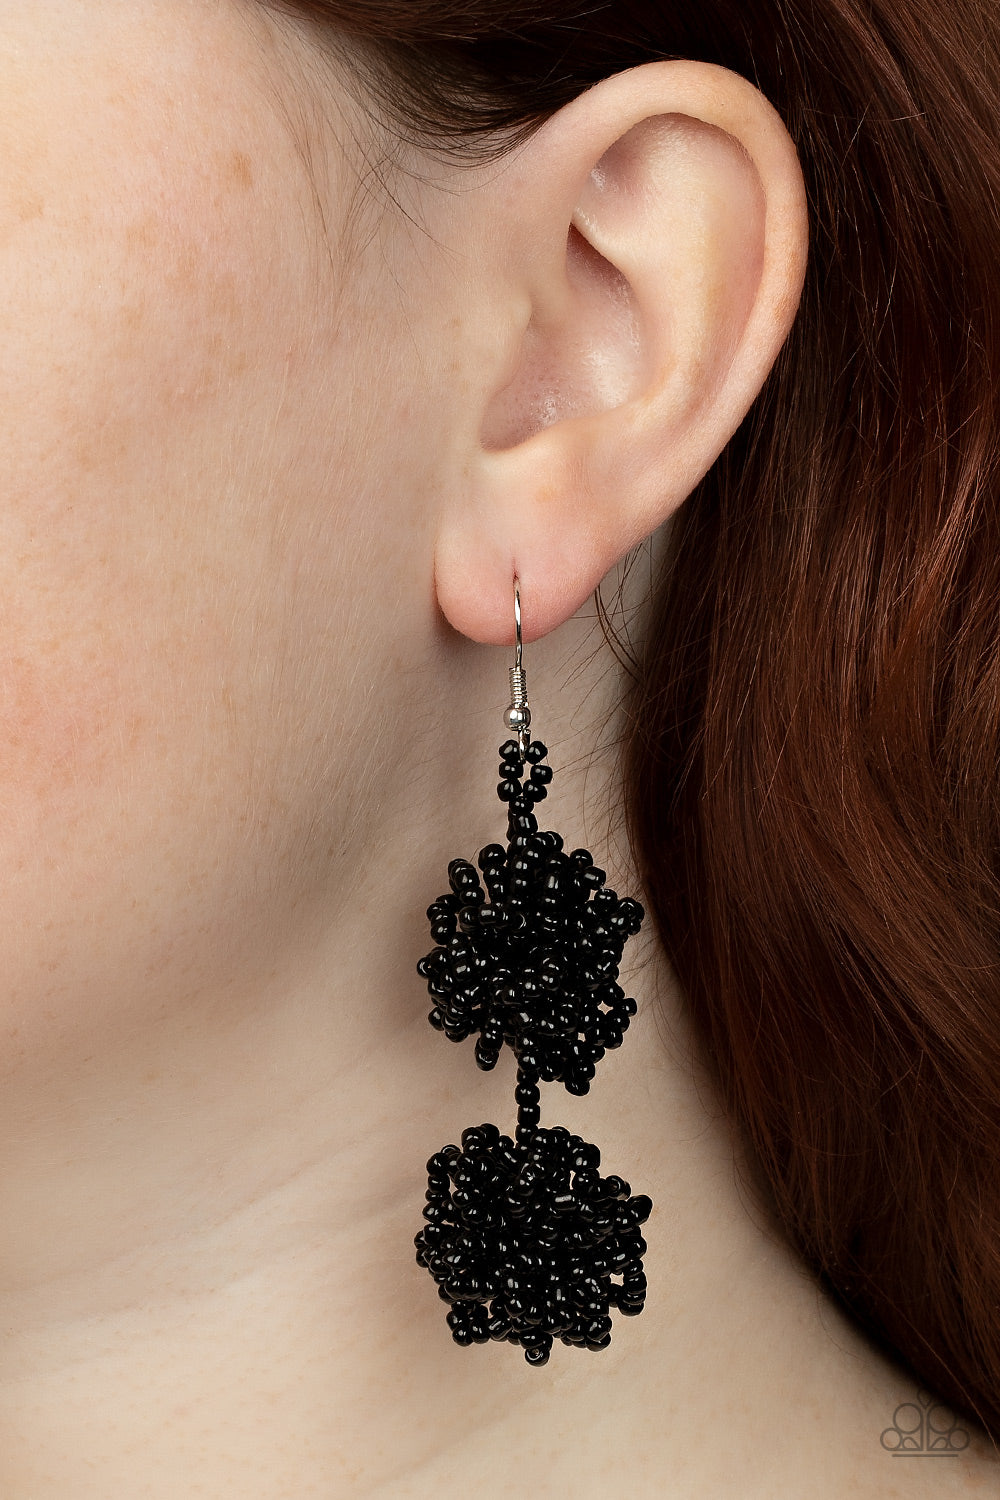 Celestial Collision - Black seed bead earrings Paparazzi Accessories